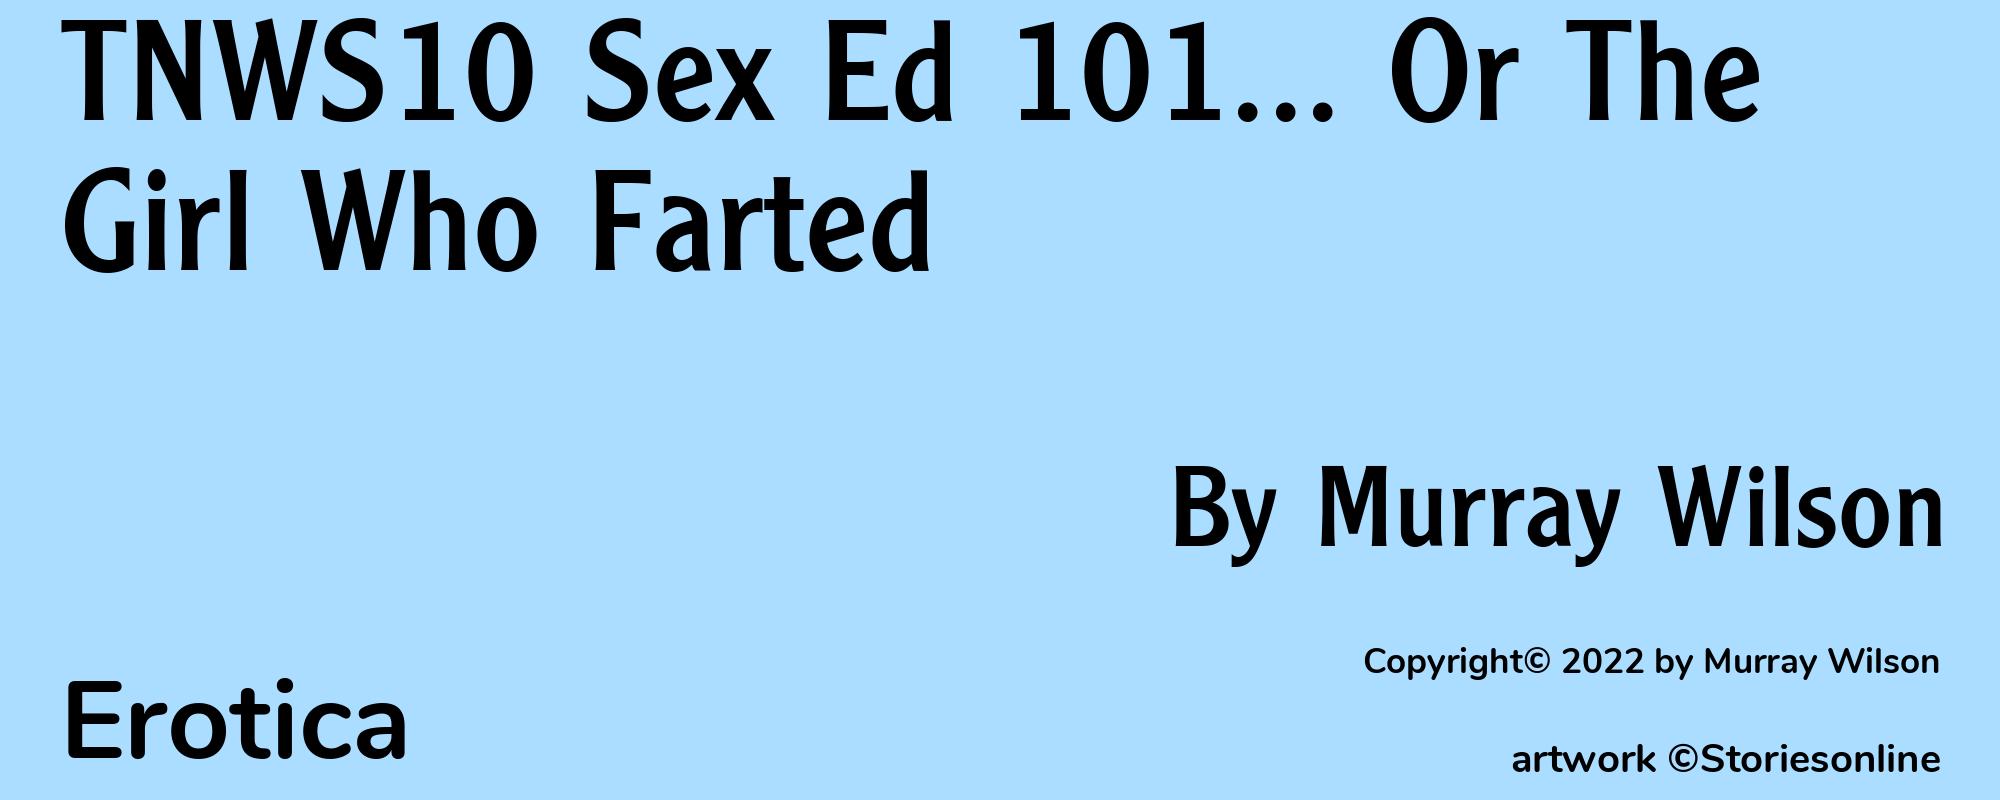 TNWS10 Sex Ed 101... Or The Girl Who Farted - Cover